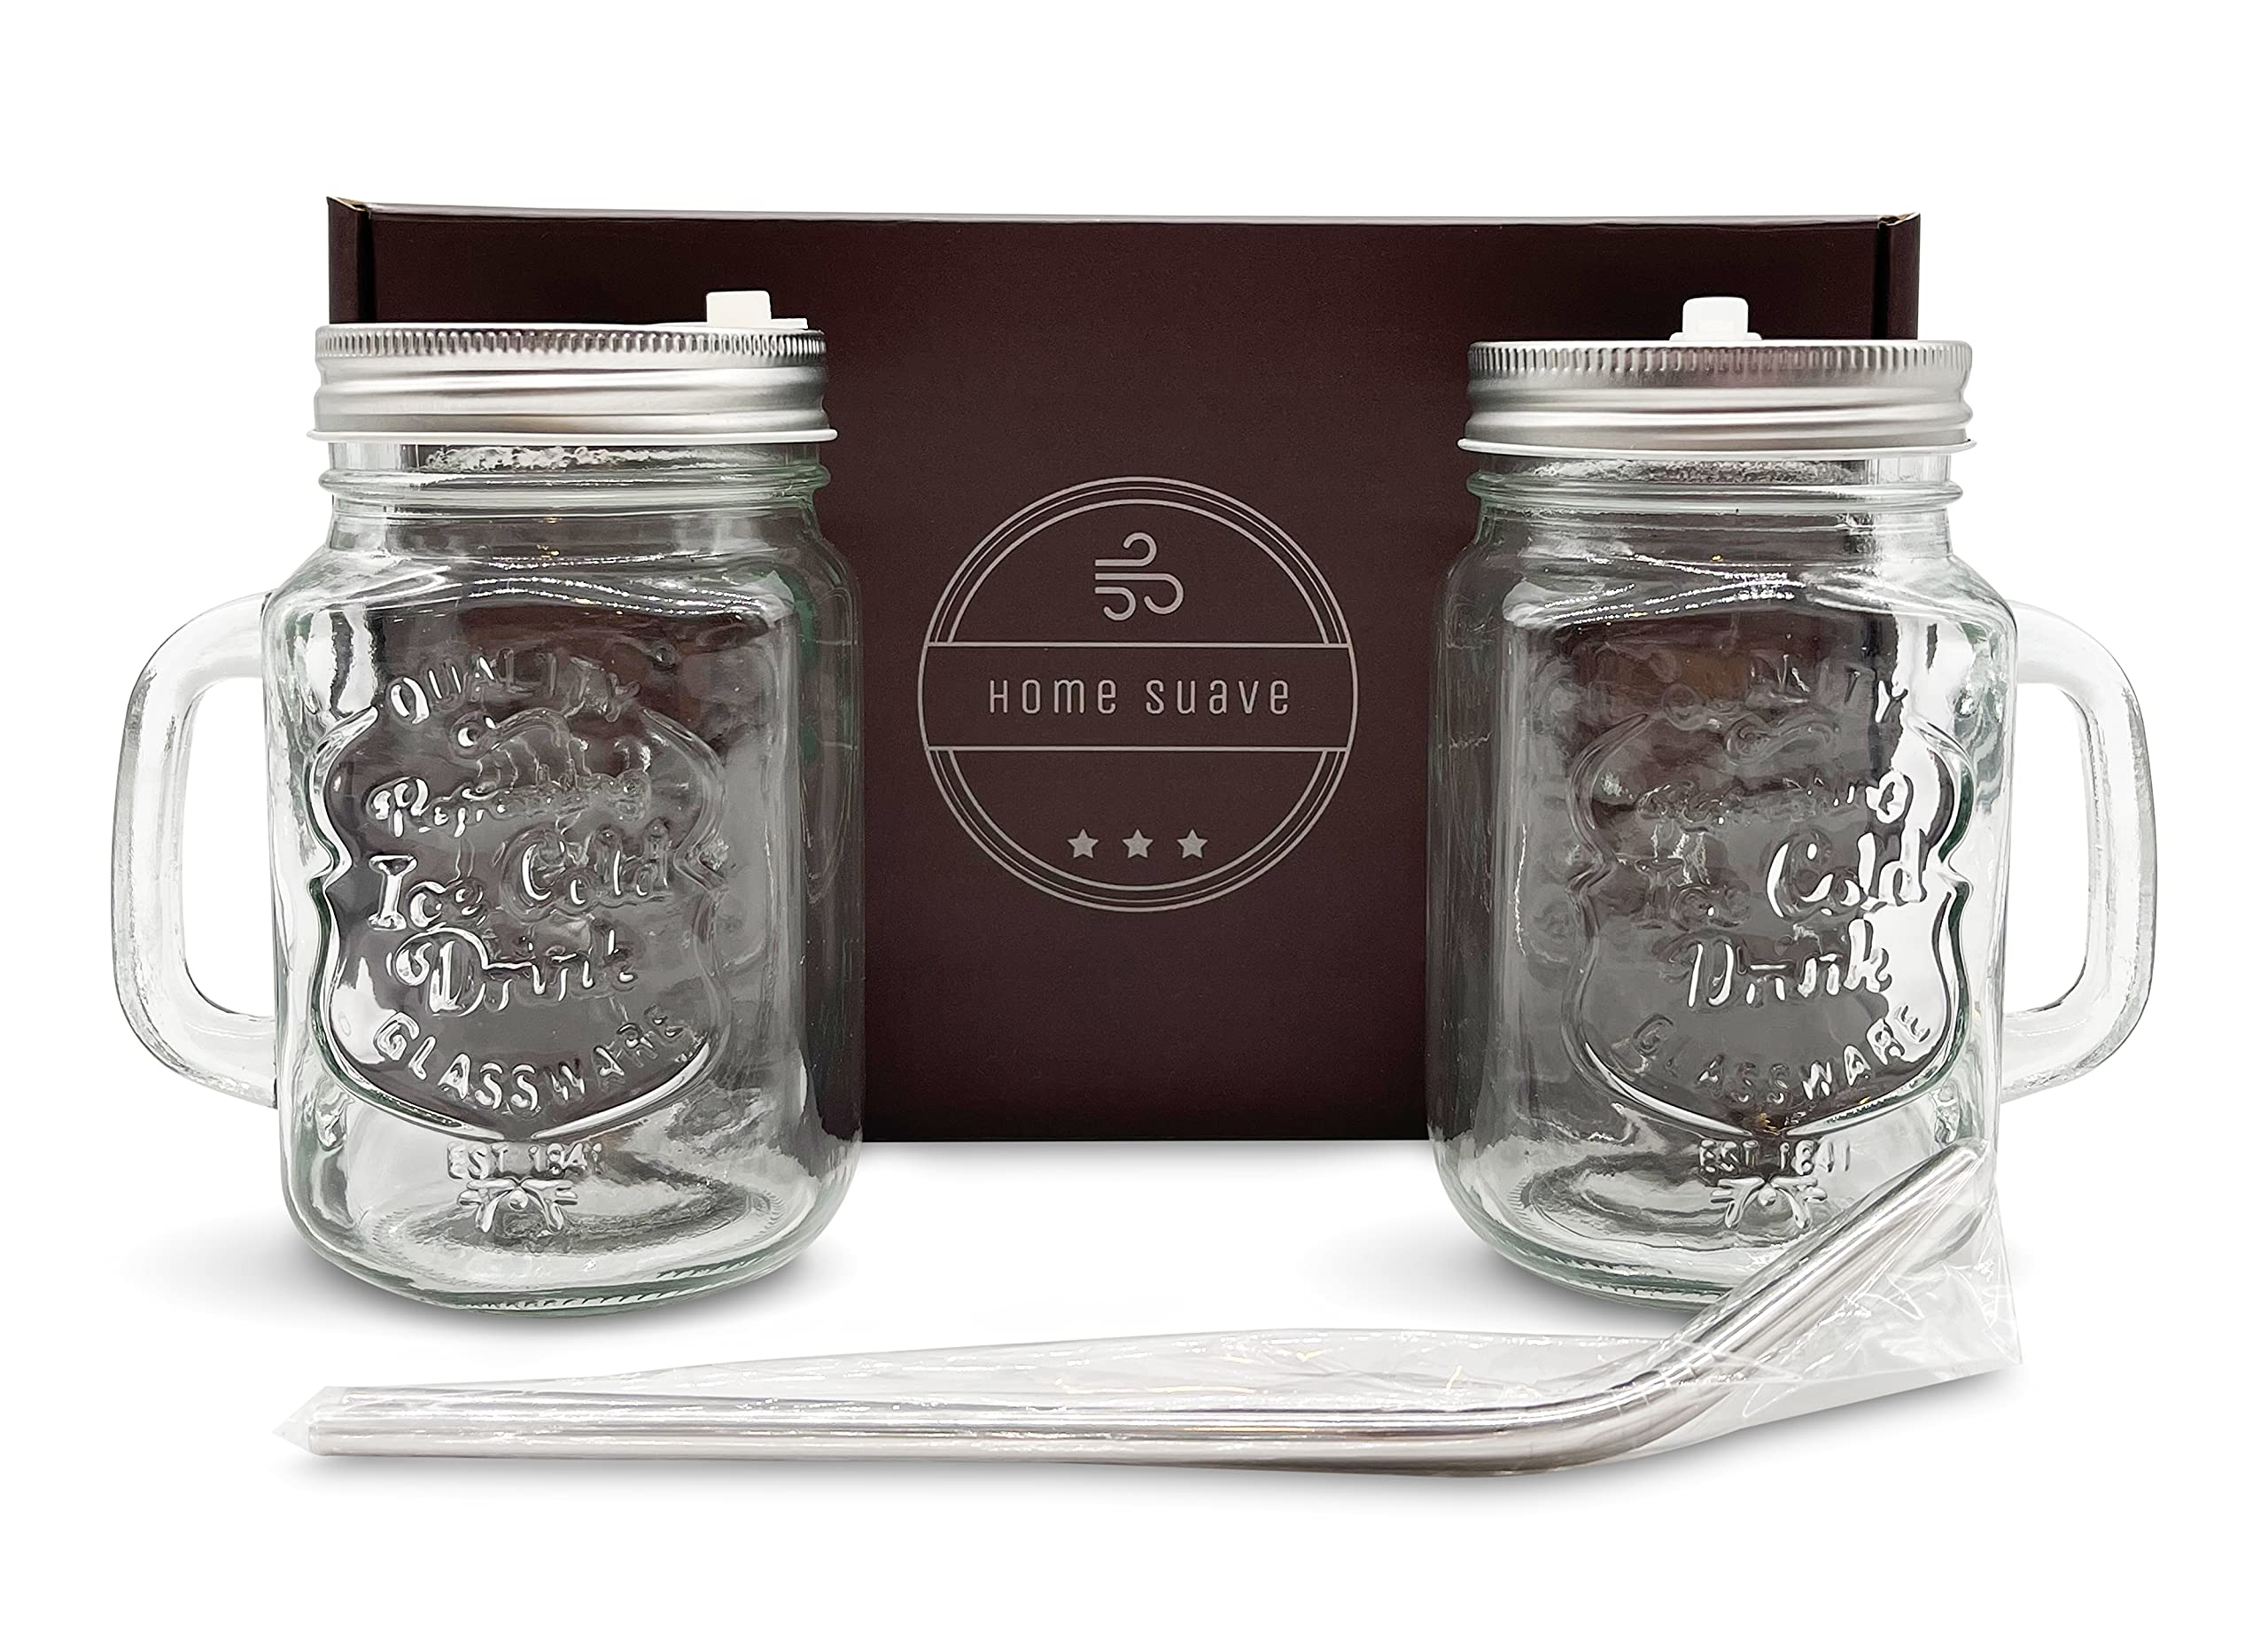 Gift Set Mason Jar Mugs with Handle, Regular Mouth Colorful Lids with 2 Reusable Stainless Steel Straw, Set of 2 (Silver), Kitchen GLASS 16 oz Jars,"Refreshing Ice Cold Drink" & Dishwasher Safe